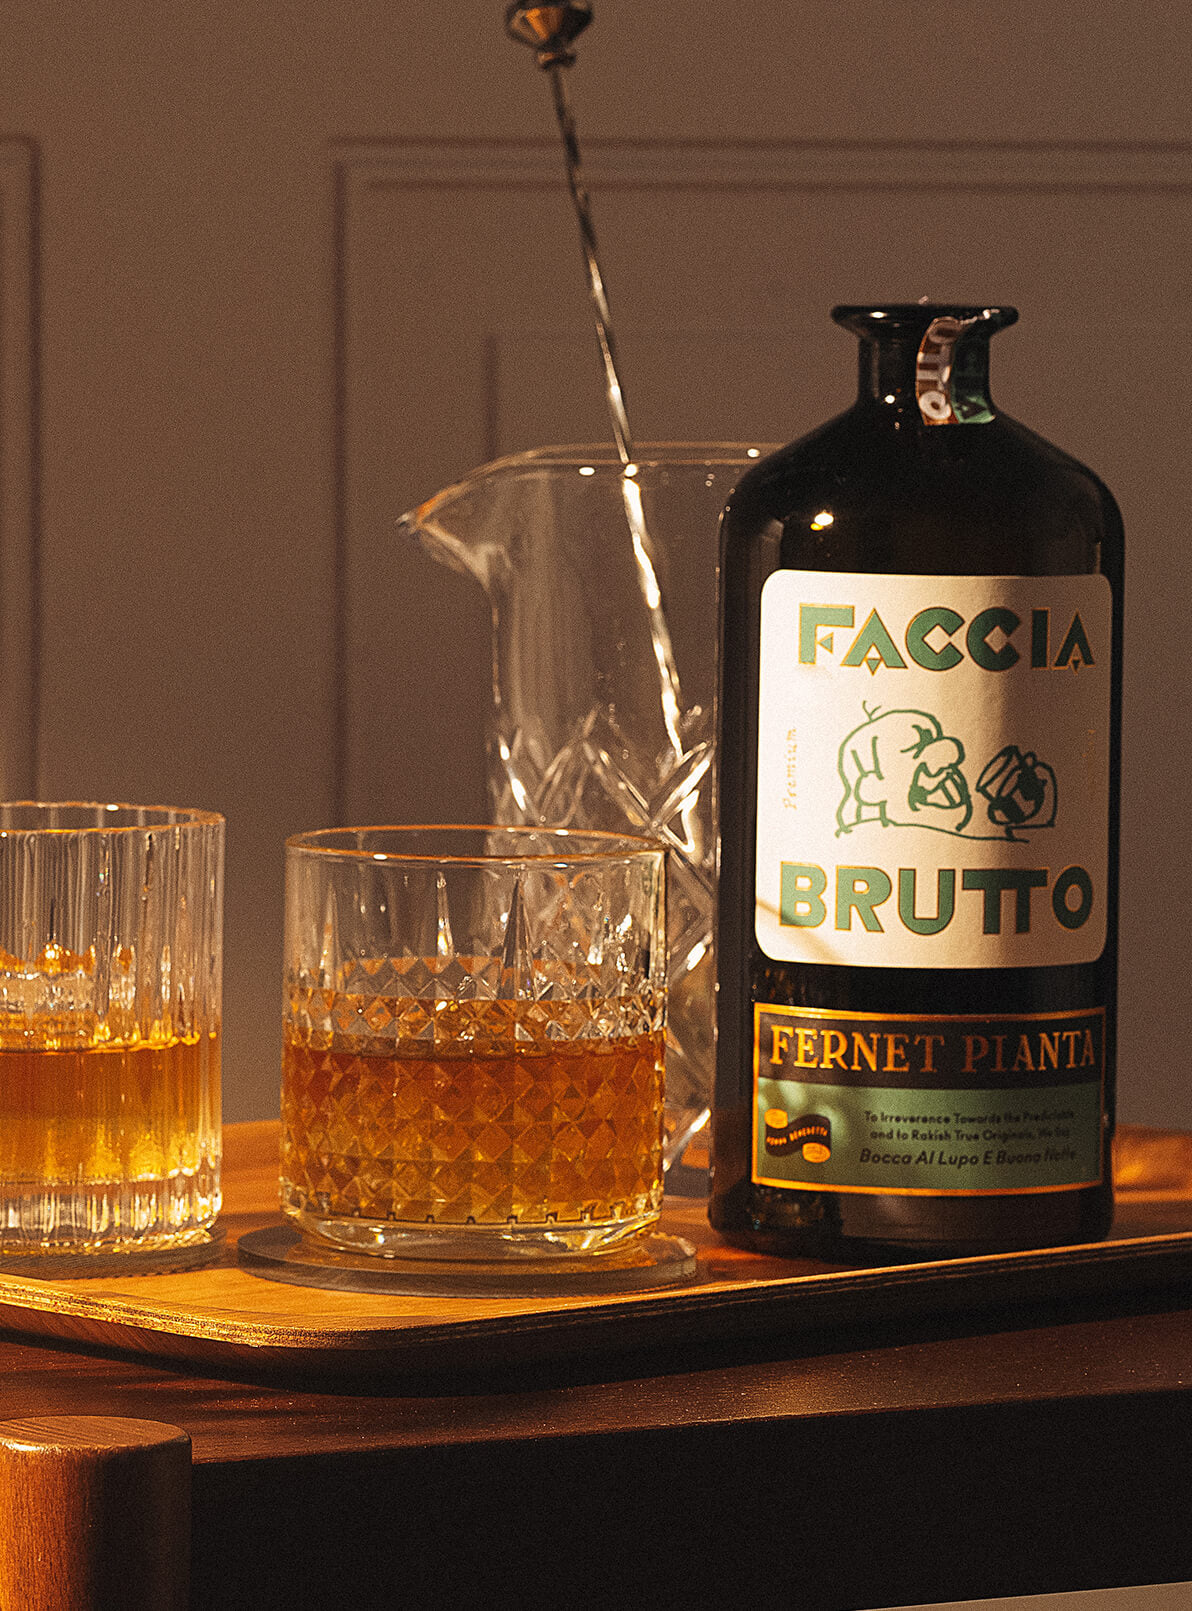 Bar cart with two cocktails, stirrer and bottle of Faccia Brutto Fernet Pianta